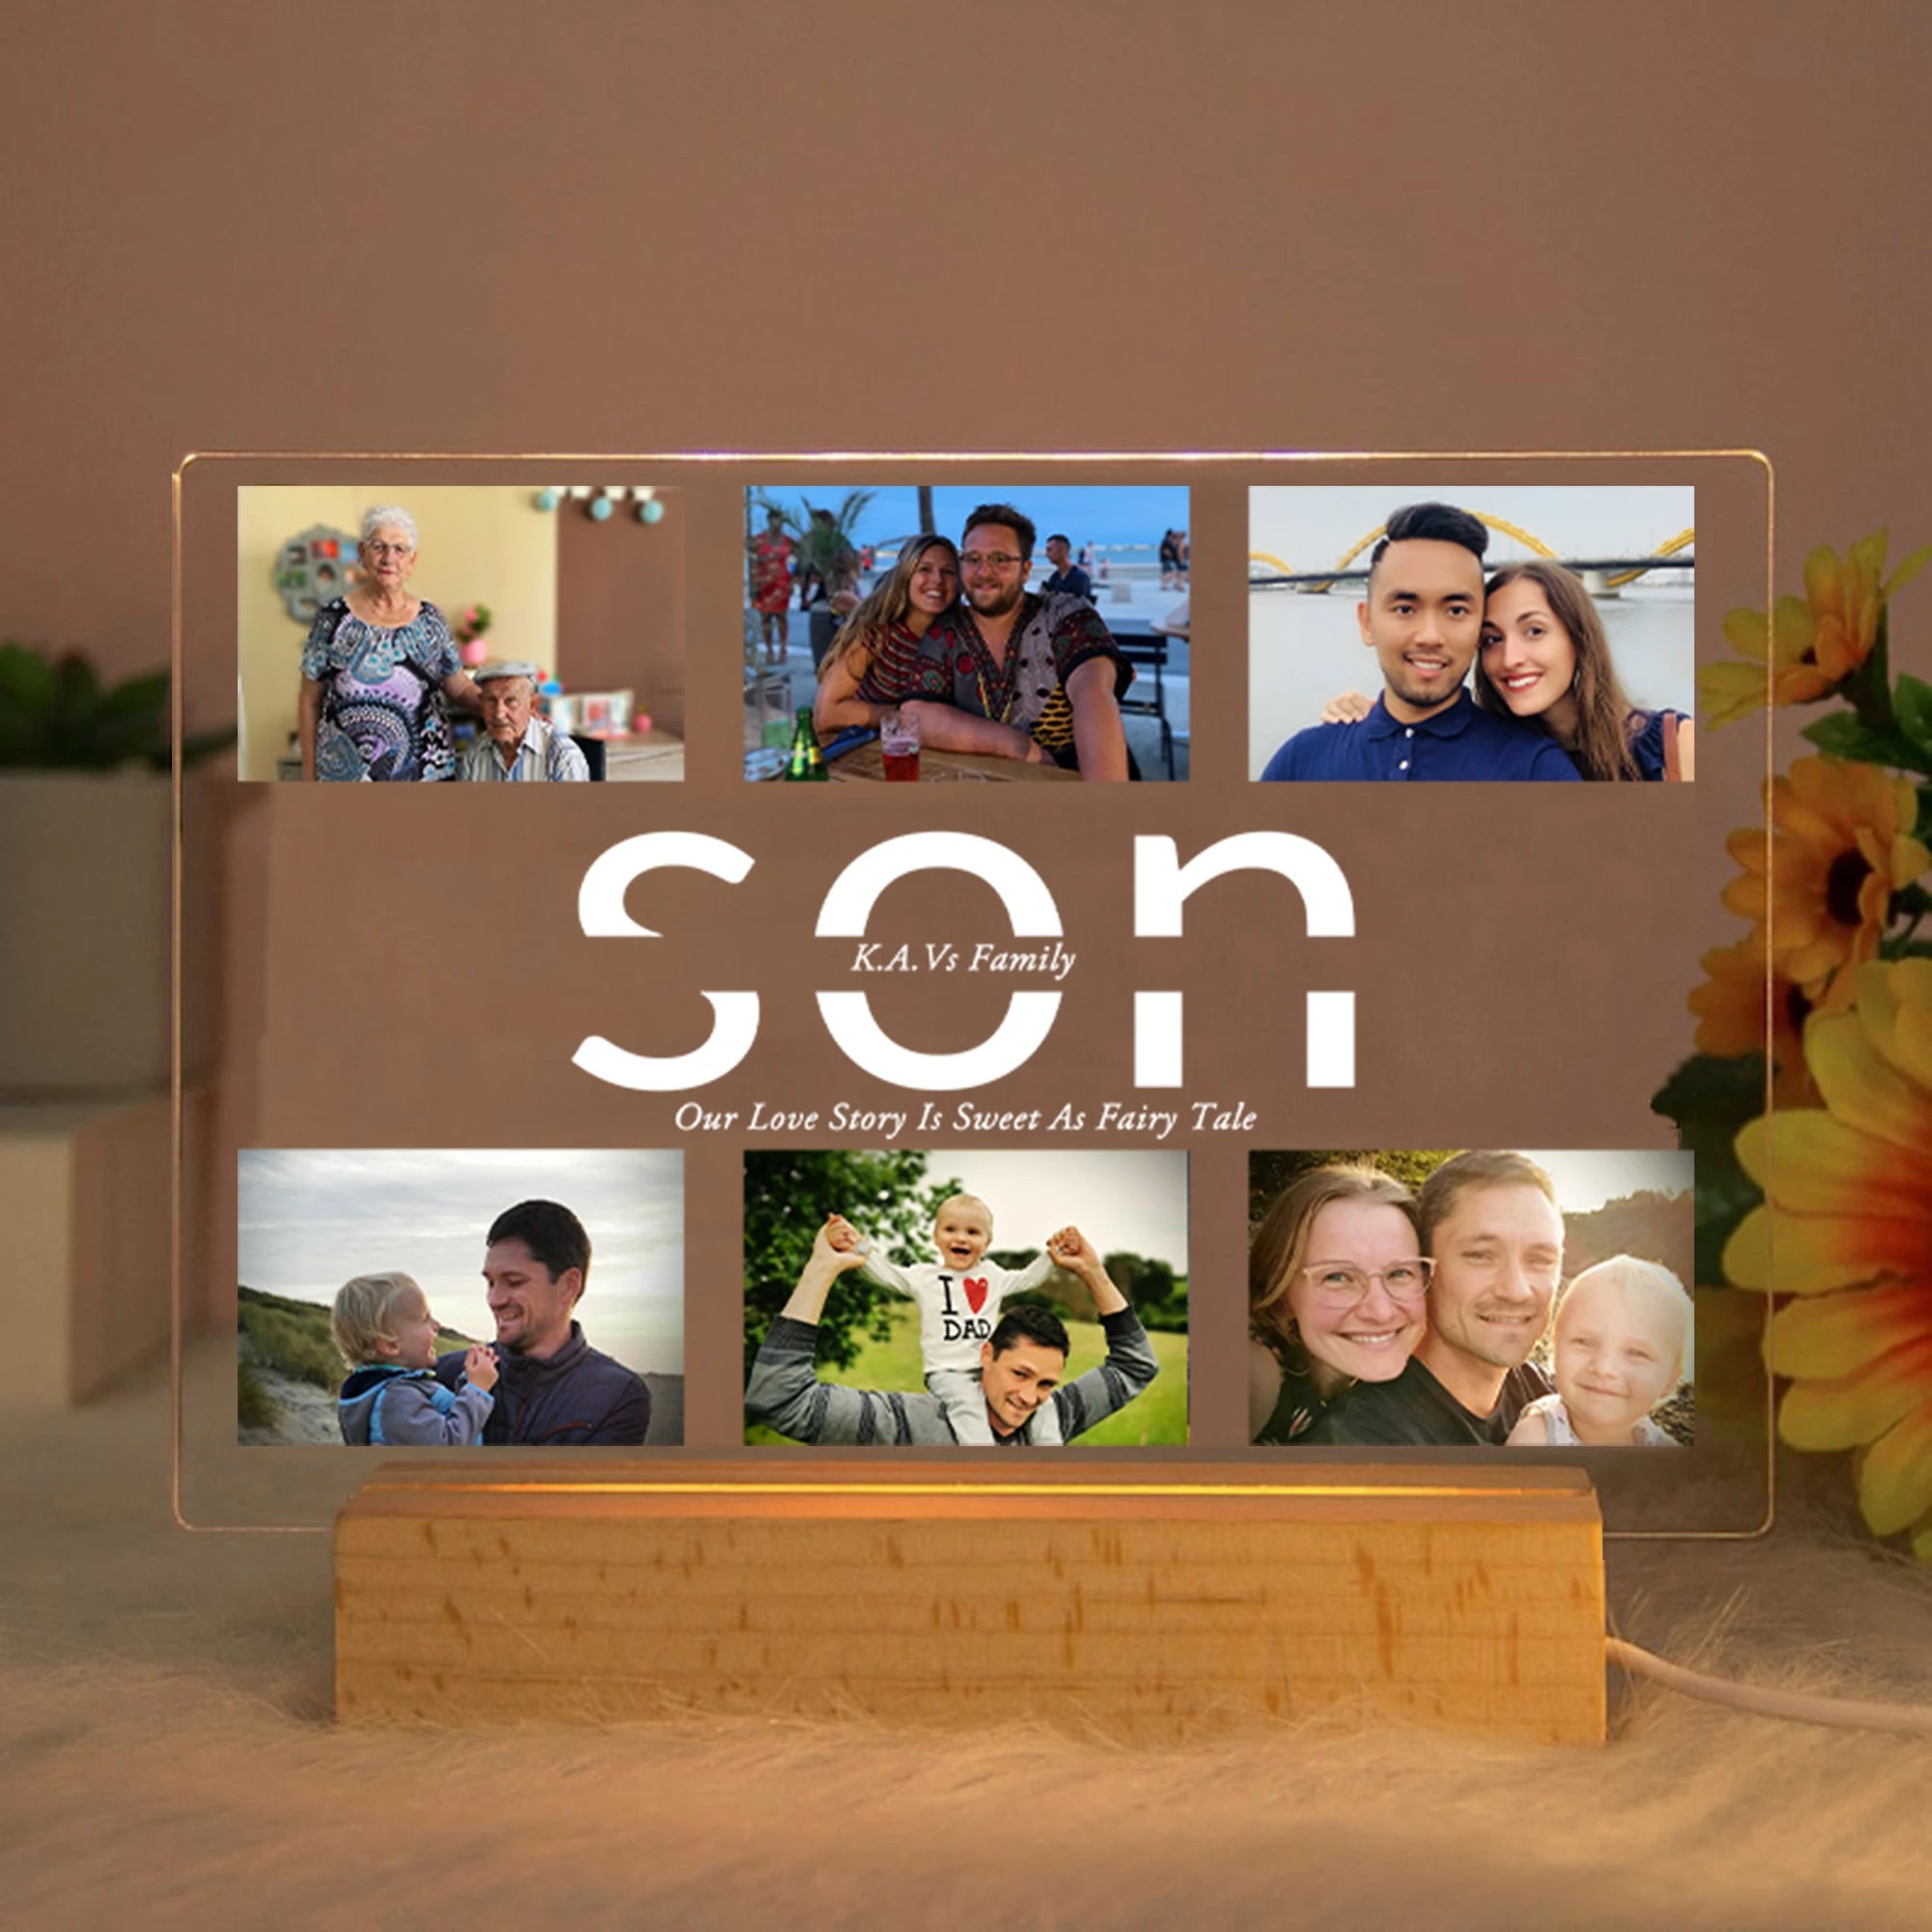 Personalized Custom Photo Text 3D Acrylic Lamp - Customized Bedroom Night Light for MOM DAD LOVE Family Day Christmas Birthday Gift Warm Light / SON